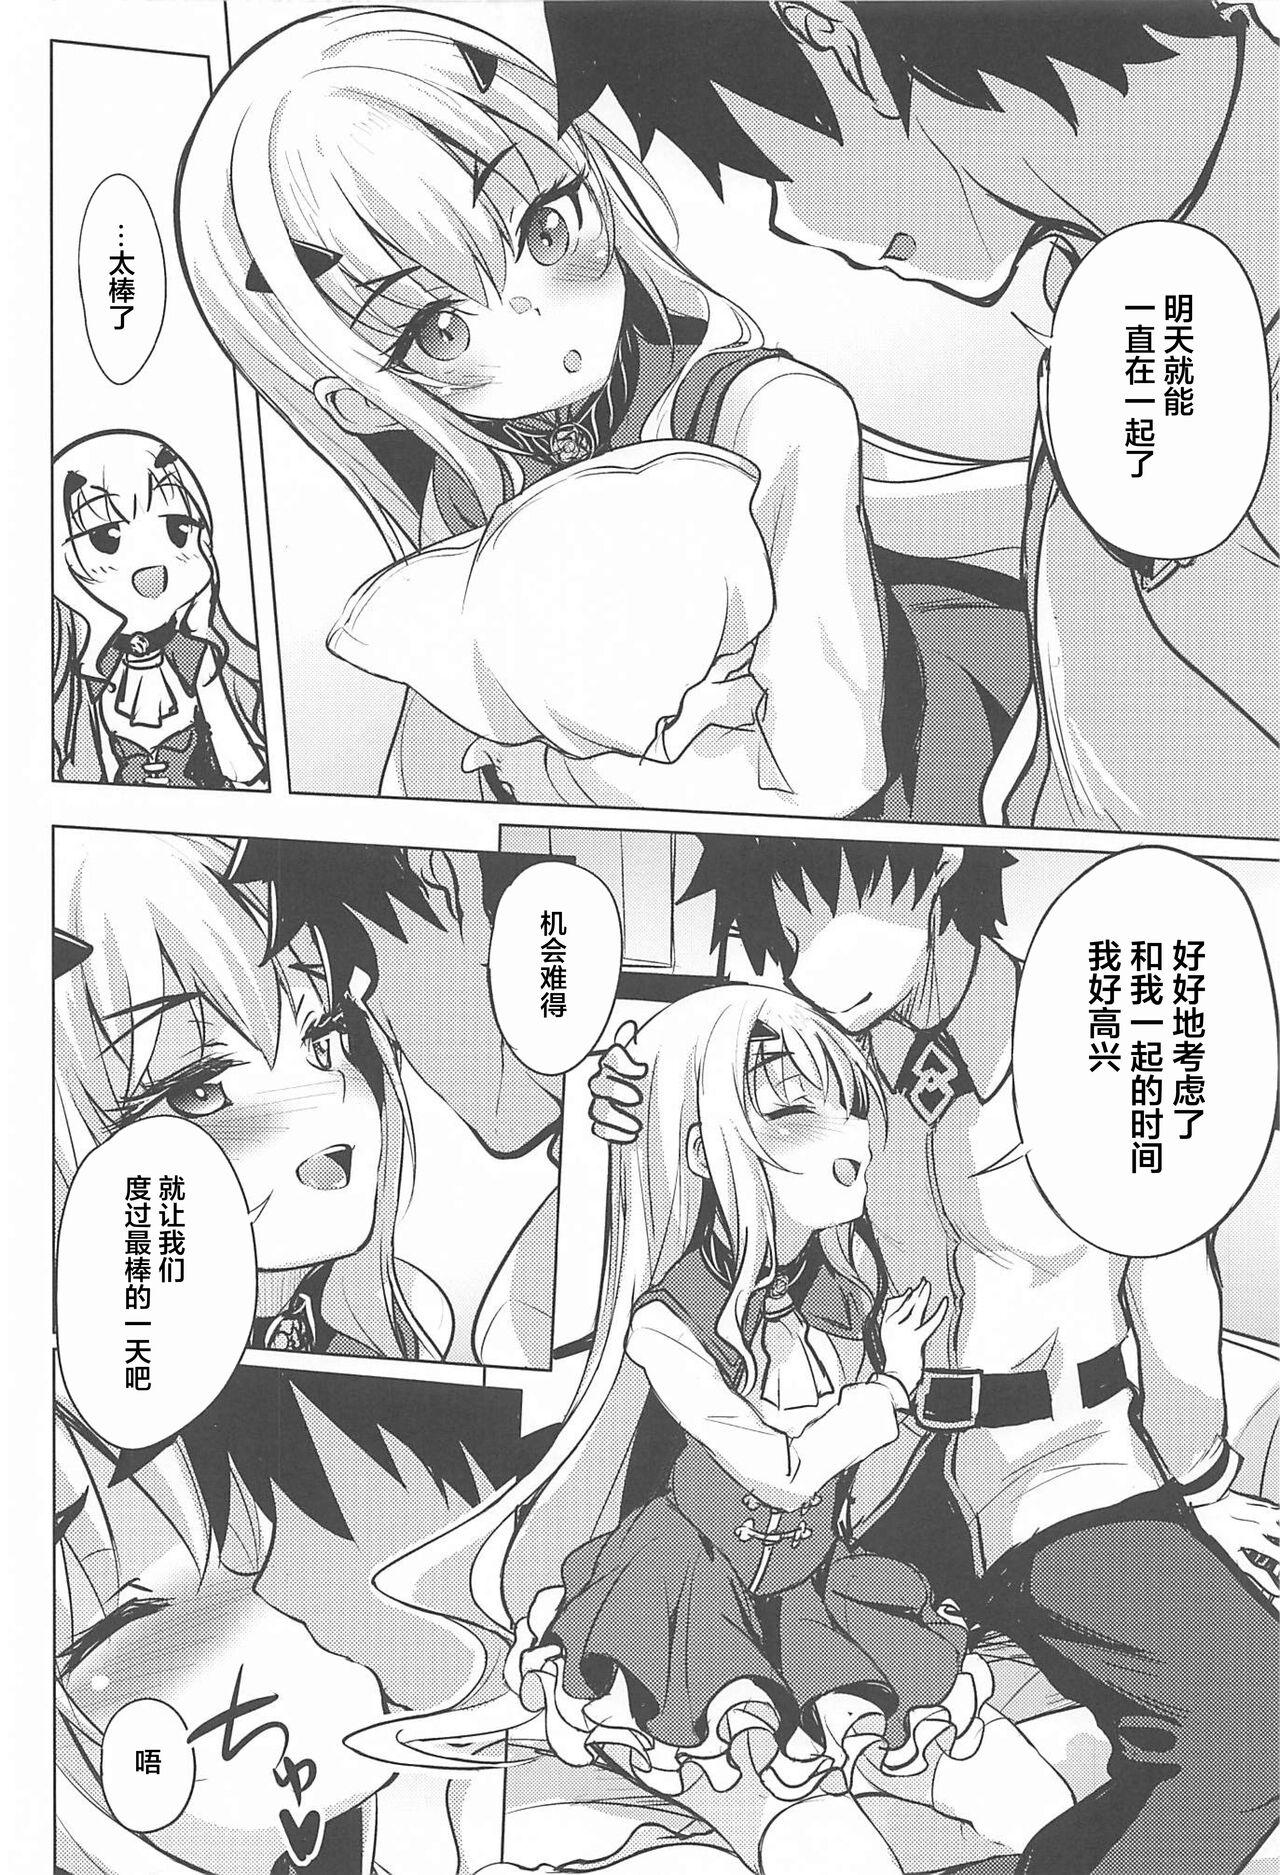 Couples Fucking 休暇日和のメリュジーヌ - Fate grand order Body Massage - Page 4